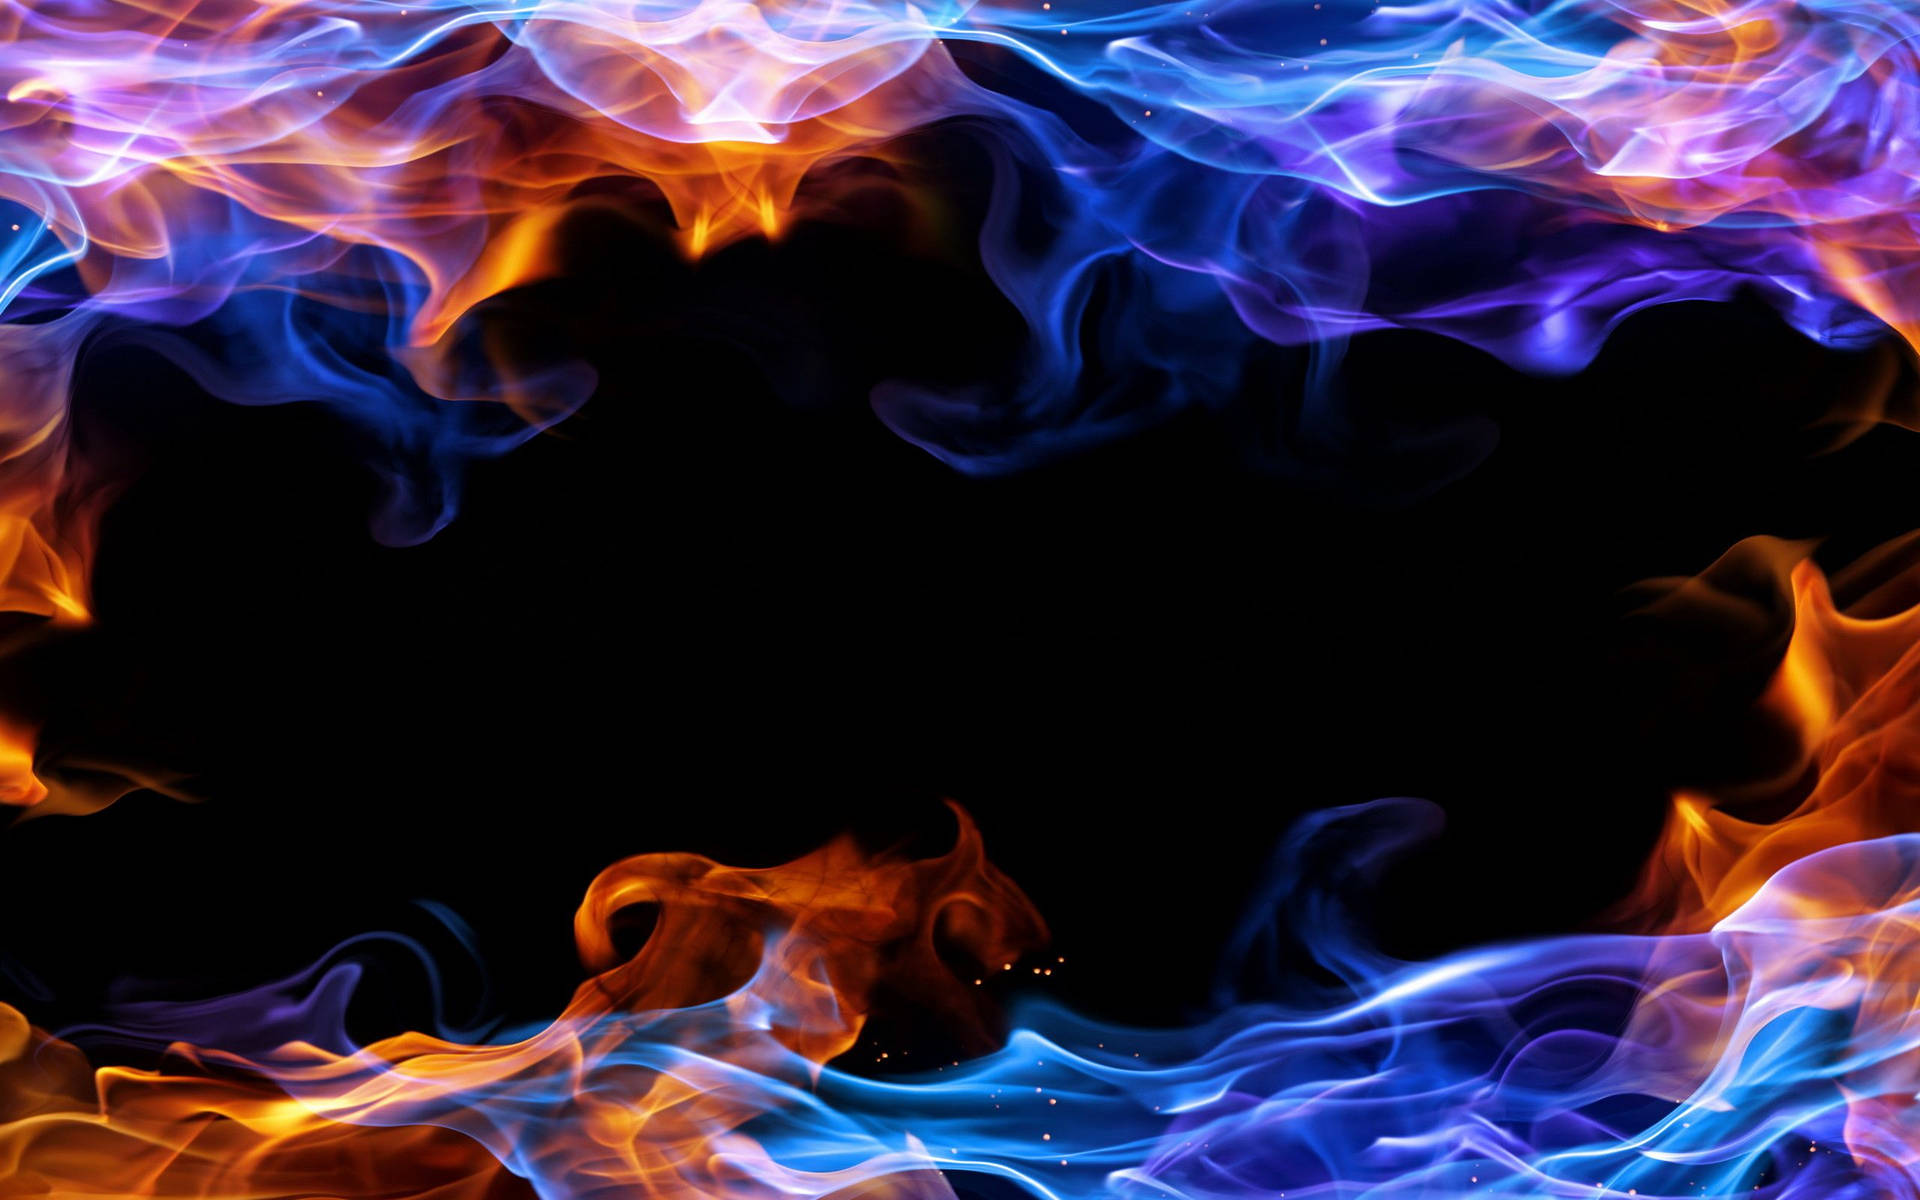 “The Bright Contrast of Fire” Wallpaper